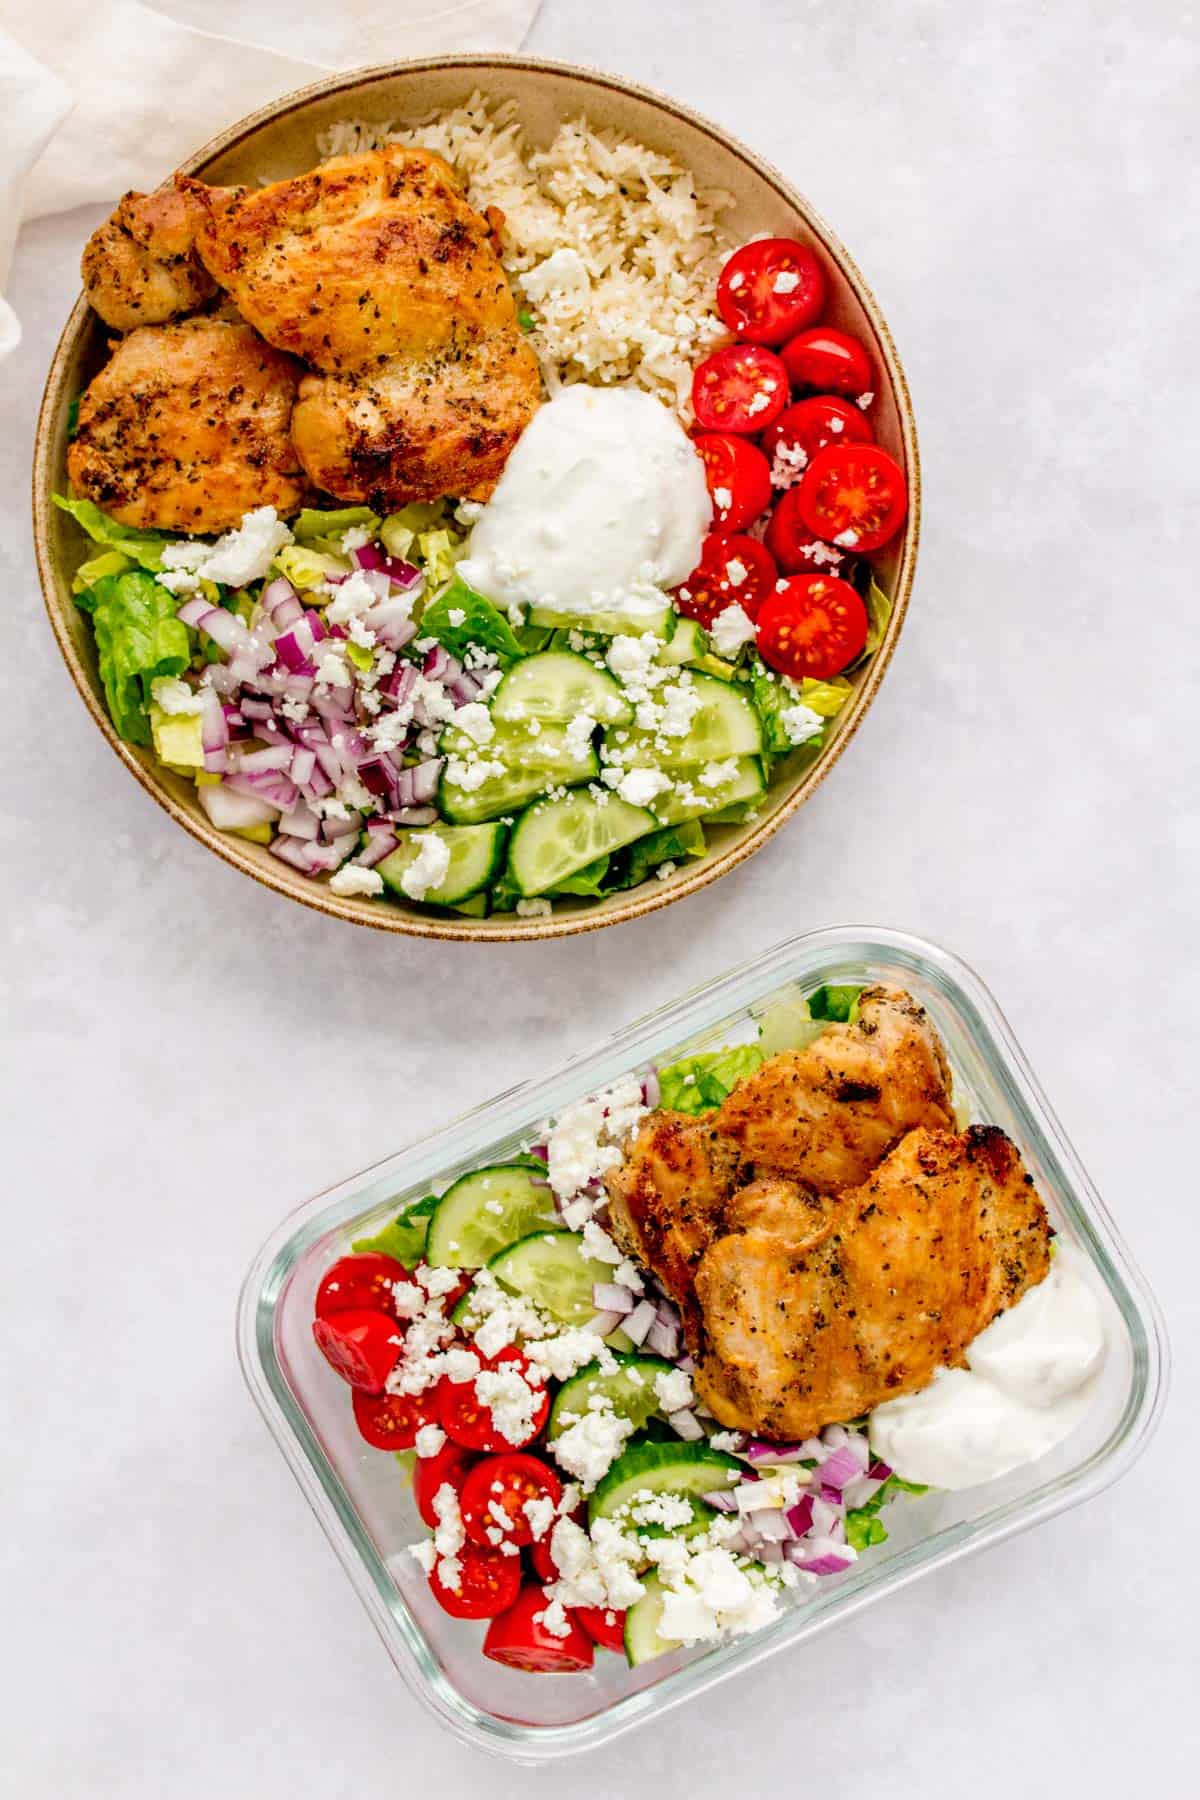 Herb chicken salad in a meal prep container and herb chicken rice bowl in a plate.